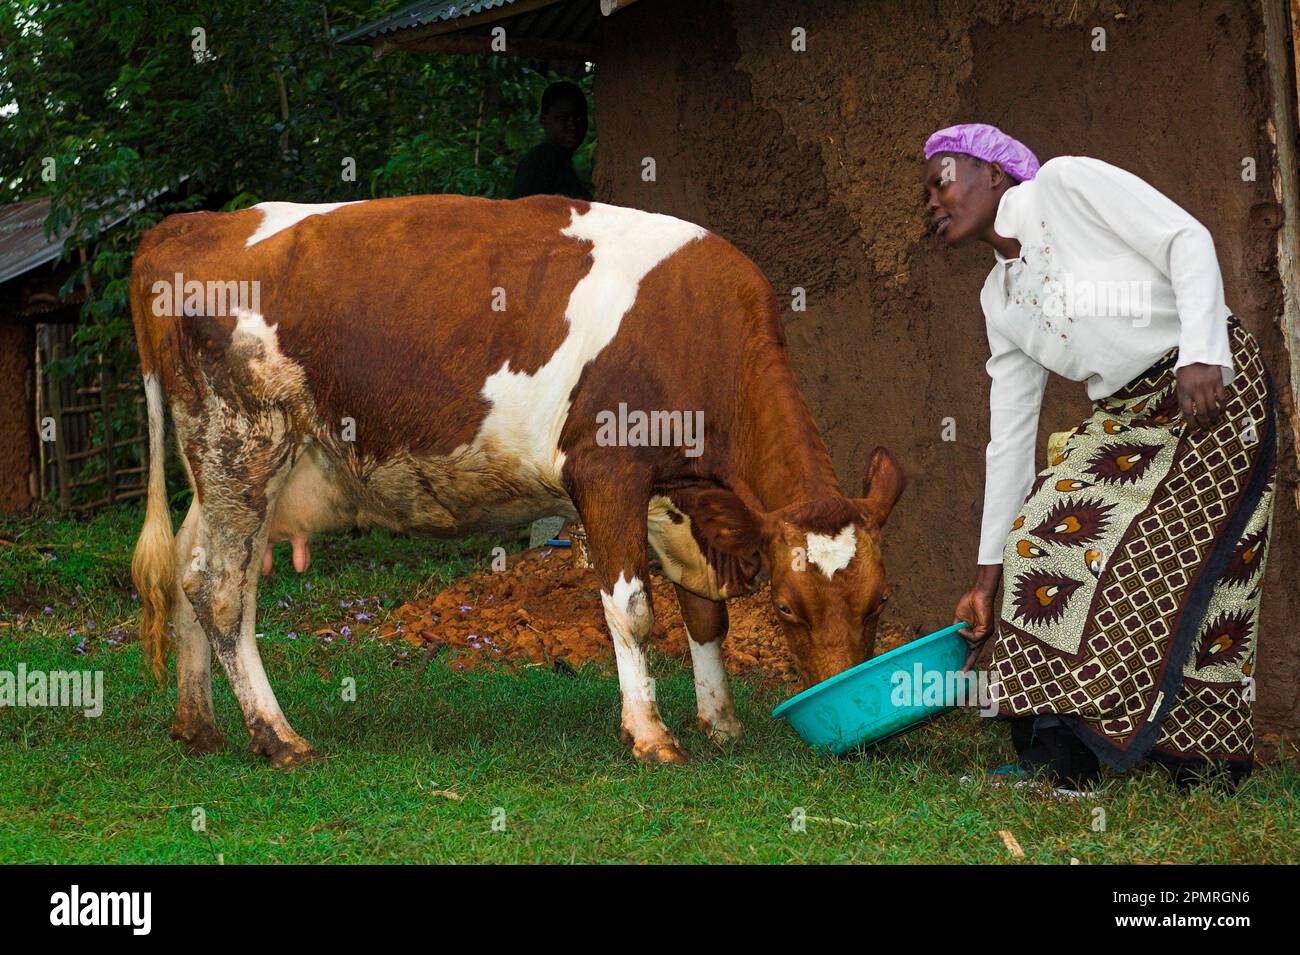 Domestic cattle, Ayrshire cow, feeding from a container kept by a woman, Western Kenya Stock Photo